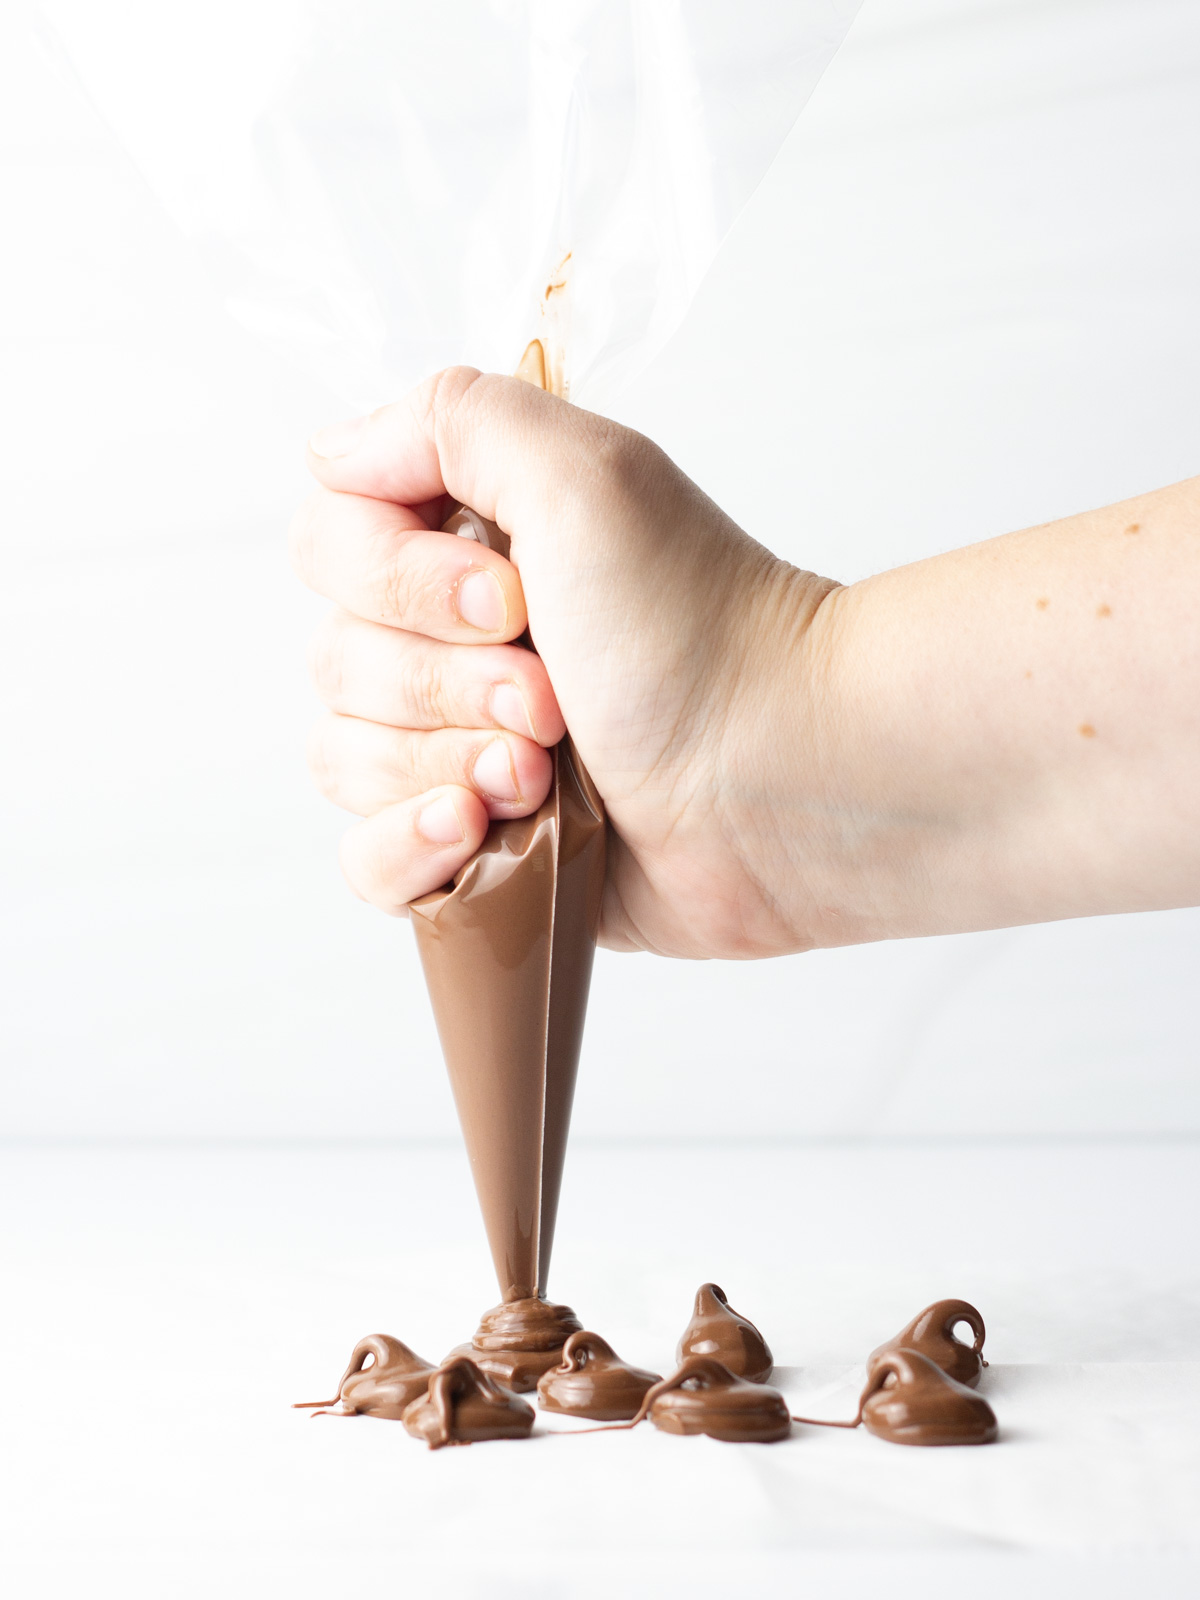 A hand holding a piping bag of Nutella piping dollops on to parchment paper.